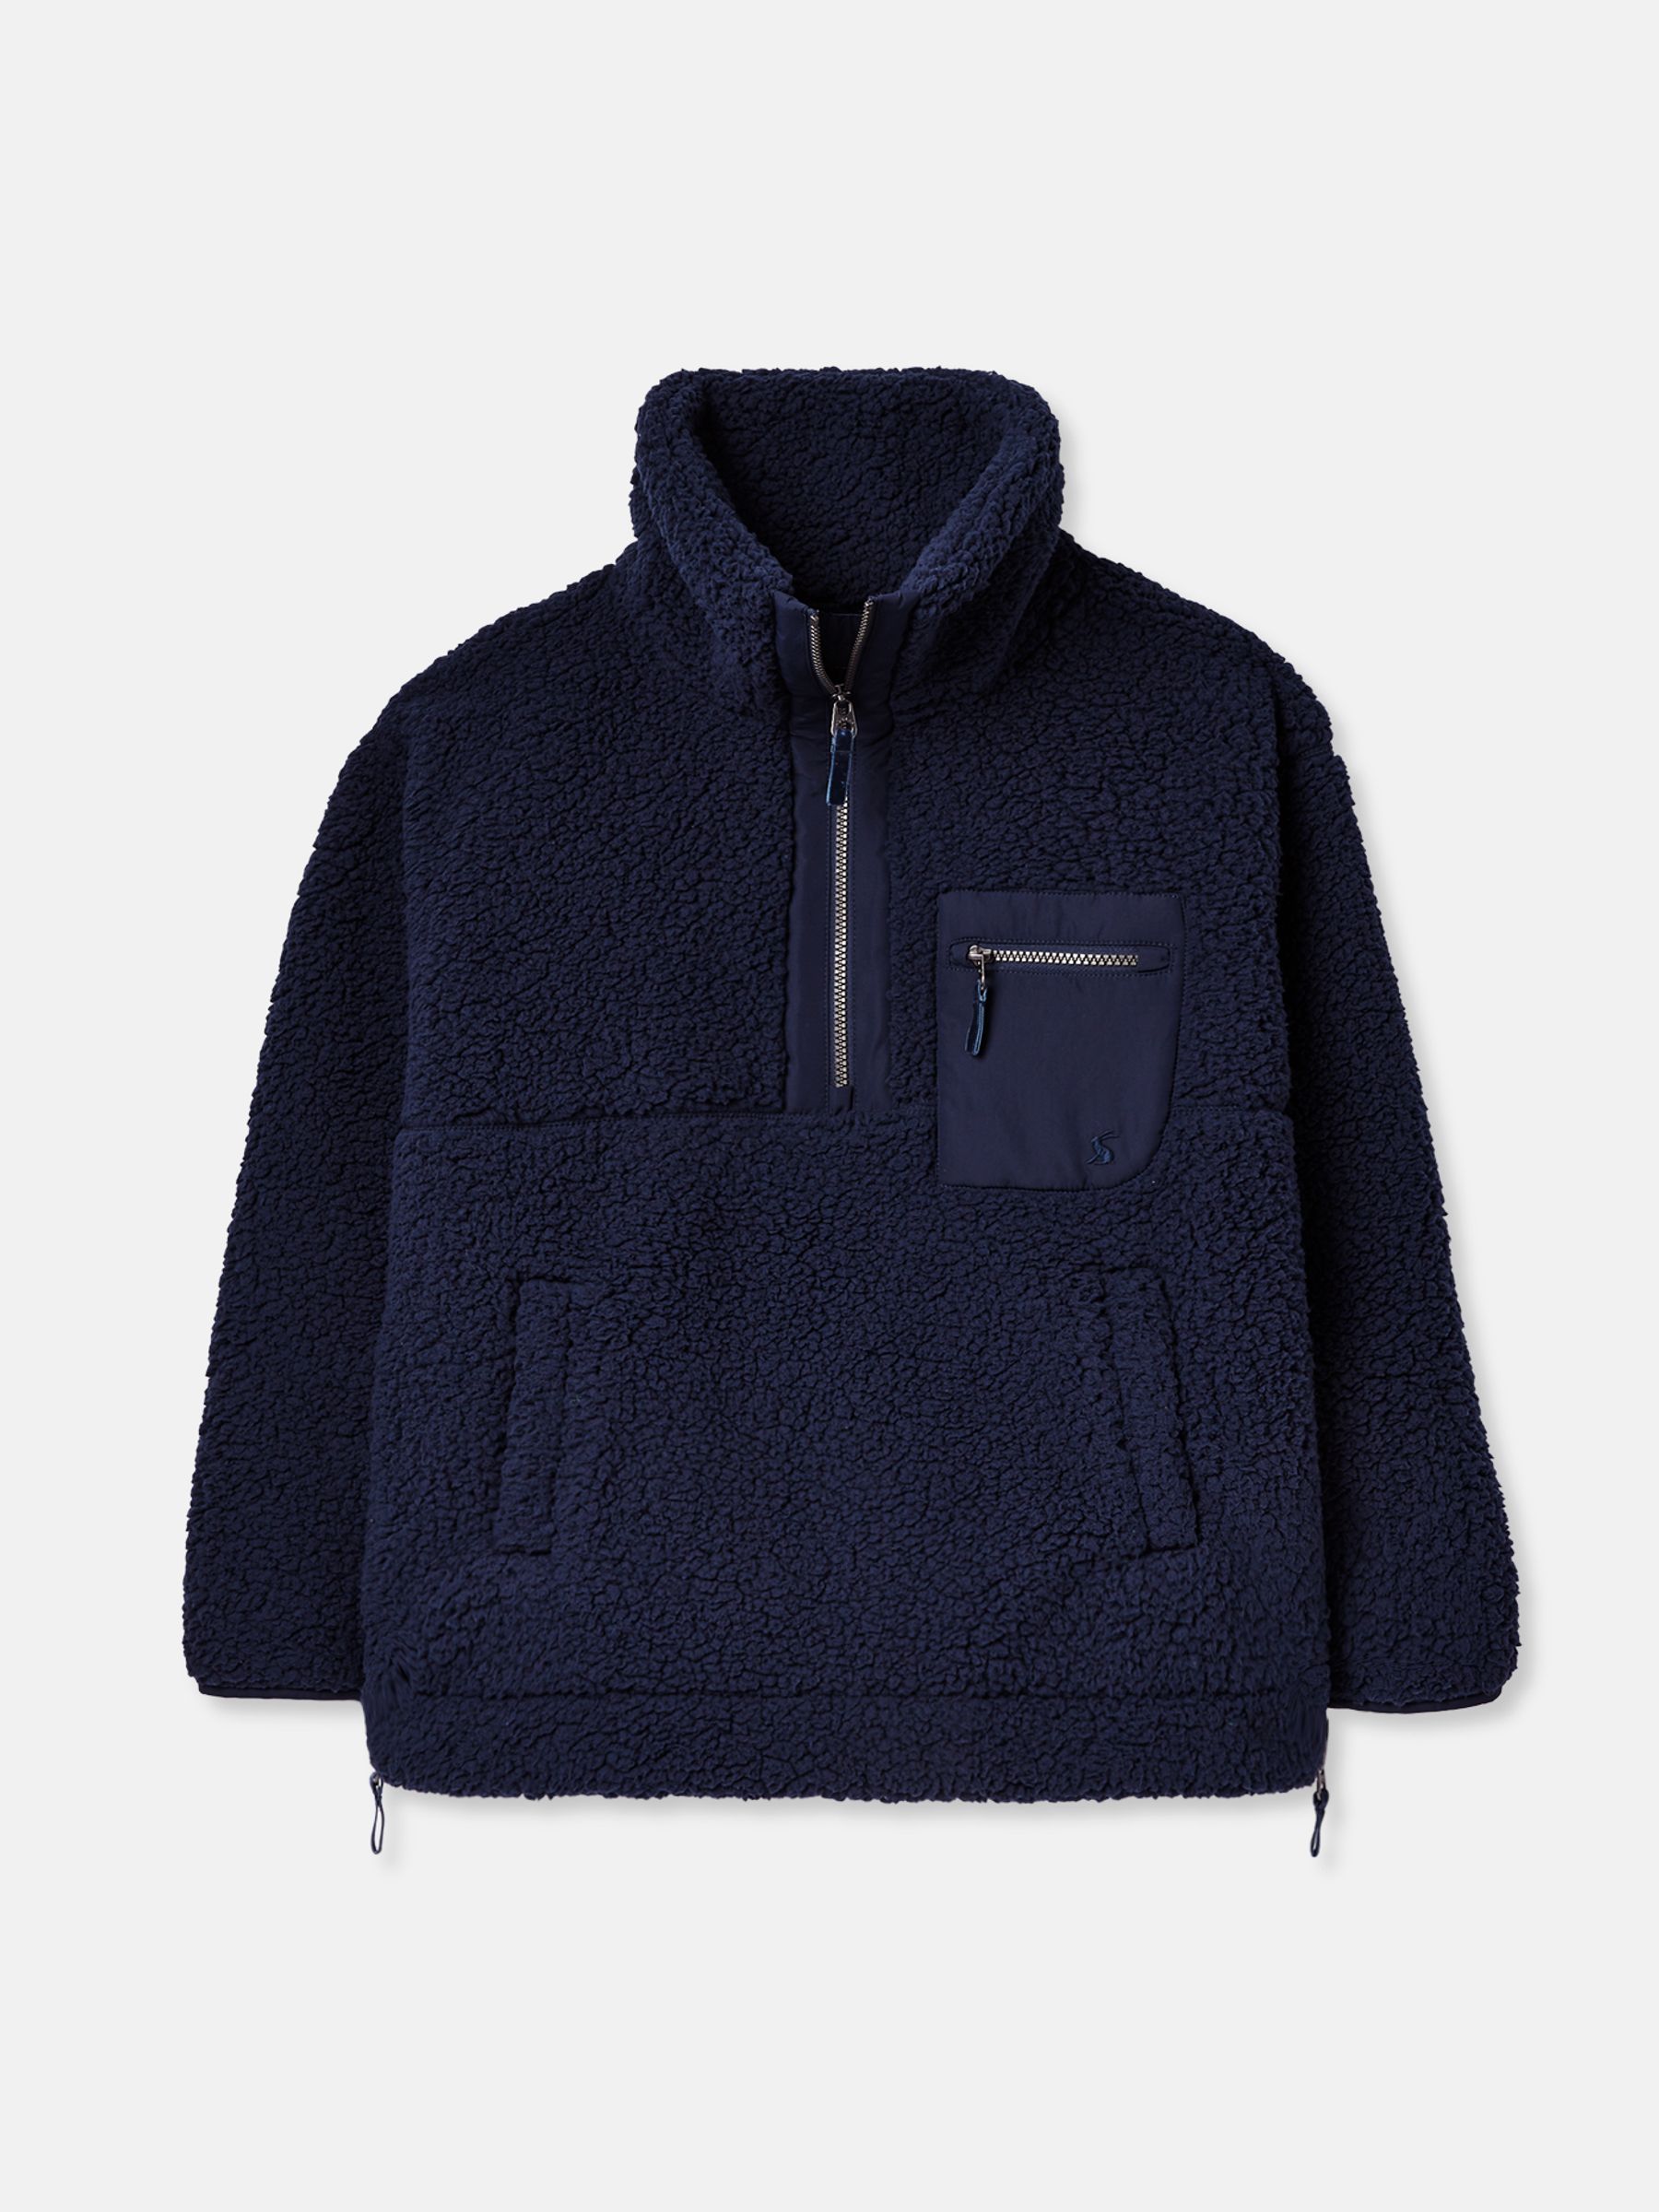 Buy Tilly Navy Blue Zip Front Fleece With Hem Detail from the Joules ...